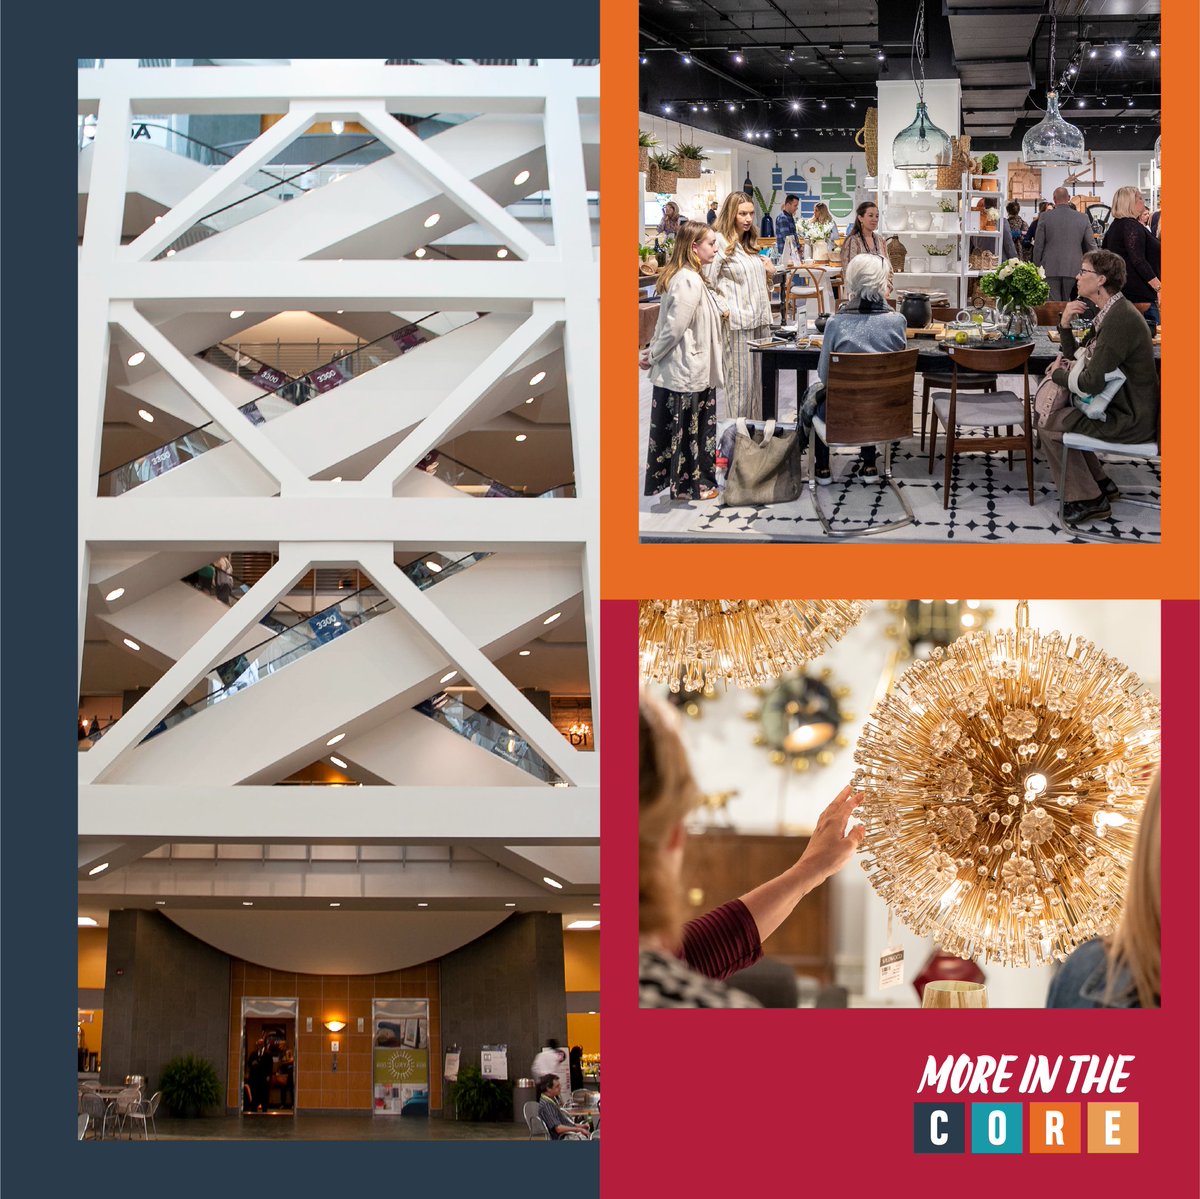 The heart of the home furnishing world lies within the #CarolinaCore. The @HPMarketNews continues to draw over 75,000 attendees each year, connecting the brightest minds and boldest brands in the industry. @CityofHighPoint @HighPointEDC